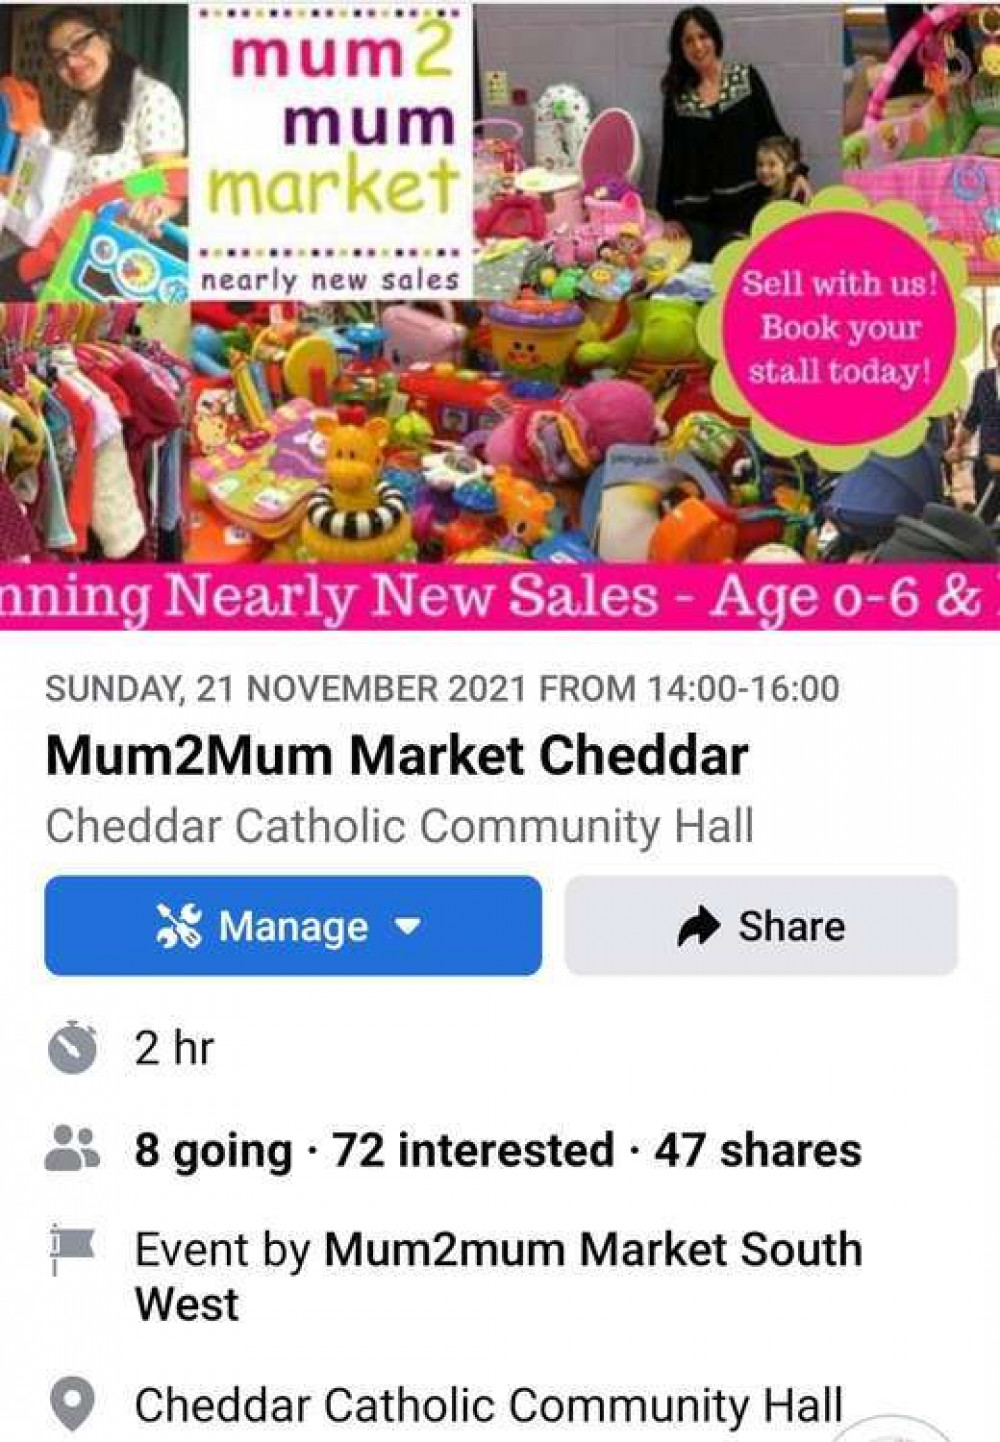 The Mum2Mum Market is taking place in Cheddar